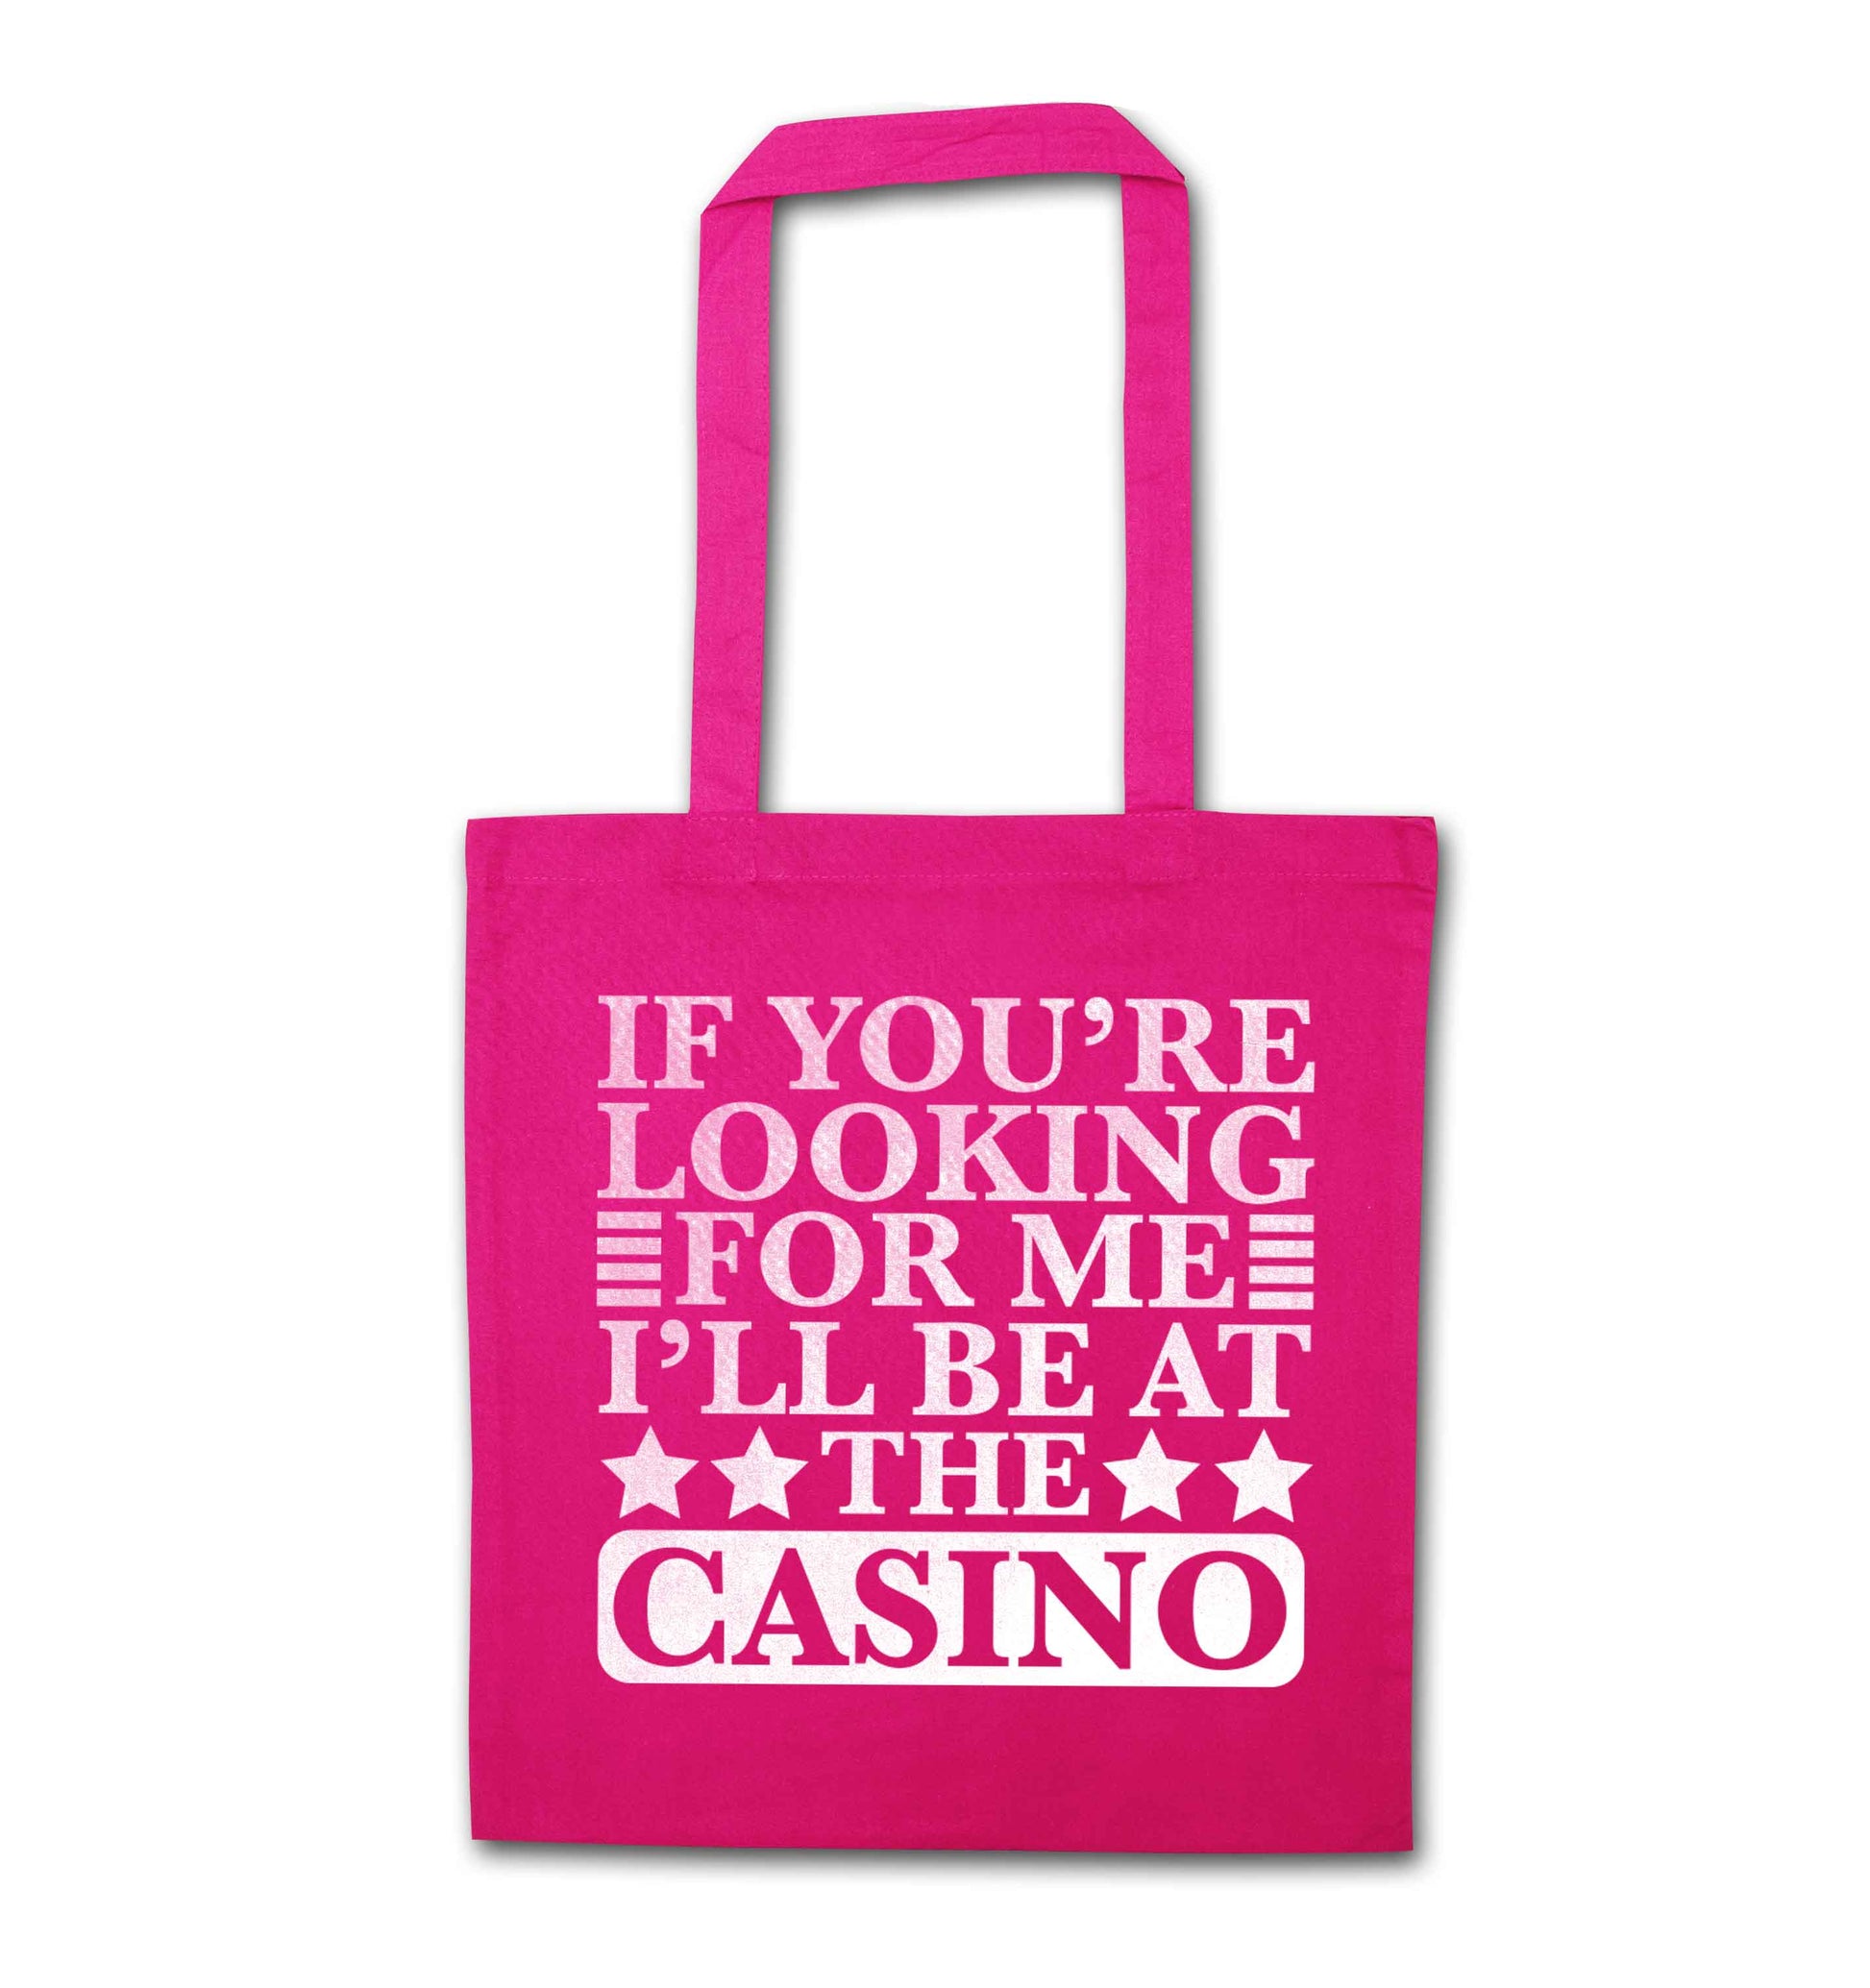 If you're looking for me I'll be at the casino pink tote bag